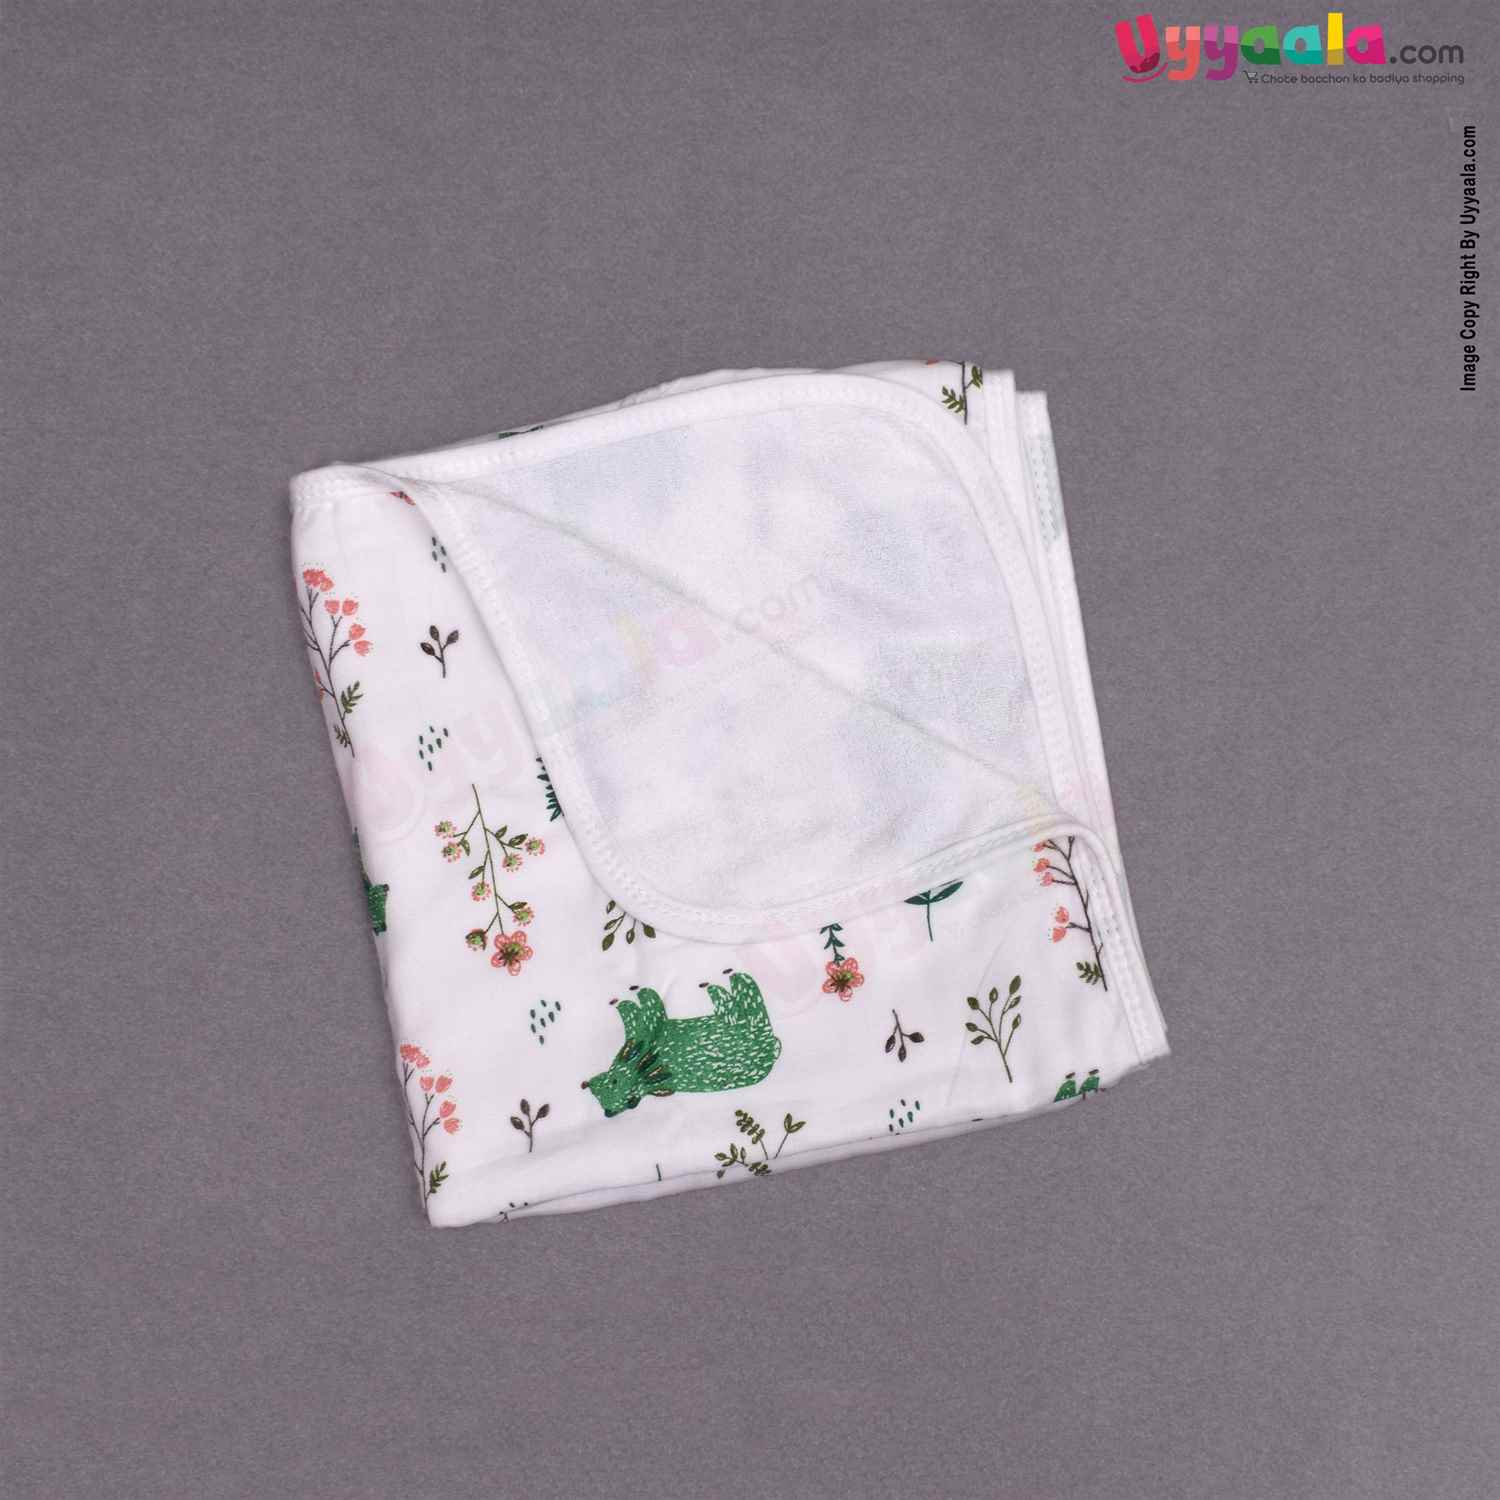 Double Layered Towel One Side Cotton &  Another Side Terry with Flowers & Bears for Babies Print 0+m Age, Size(101*51cm)-White